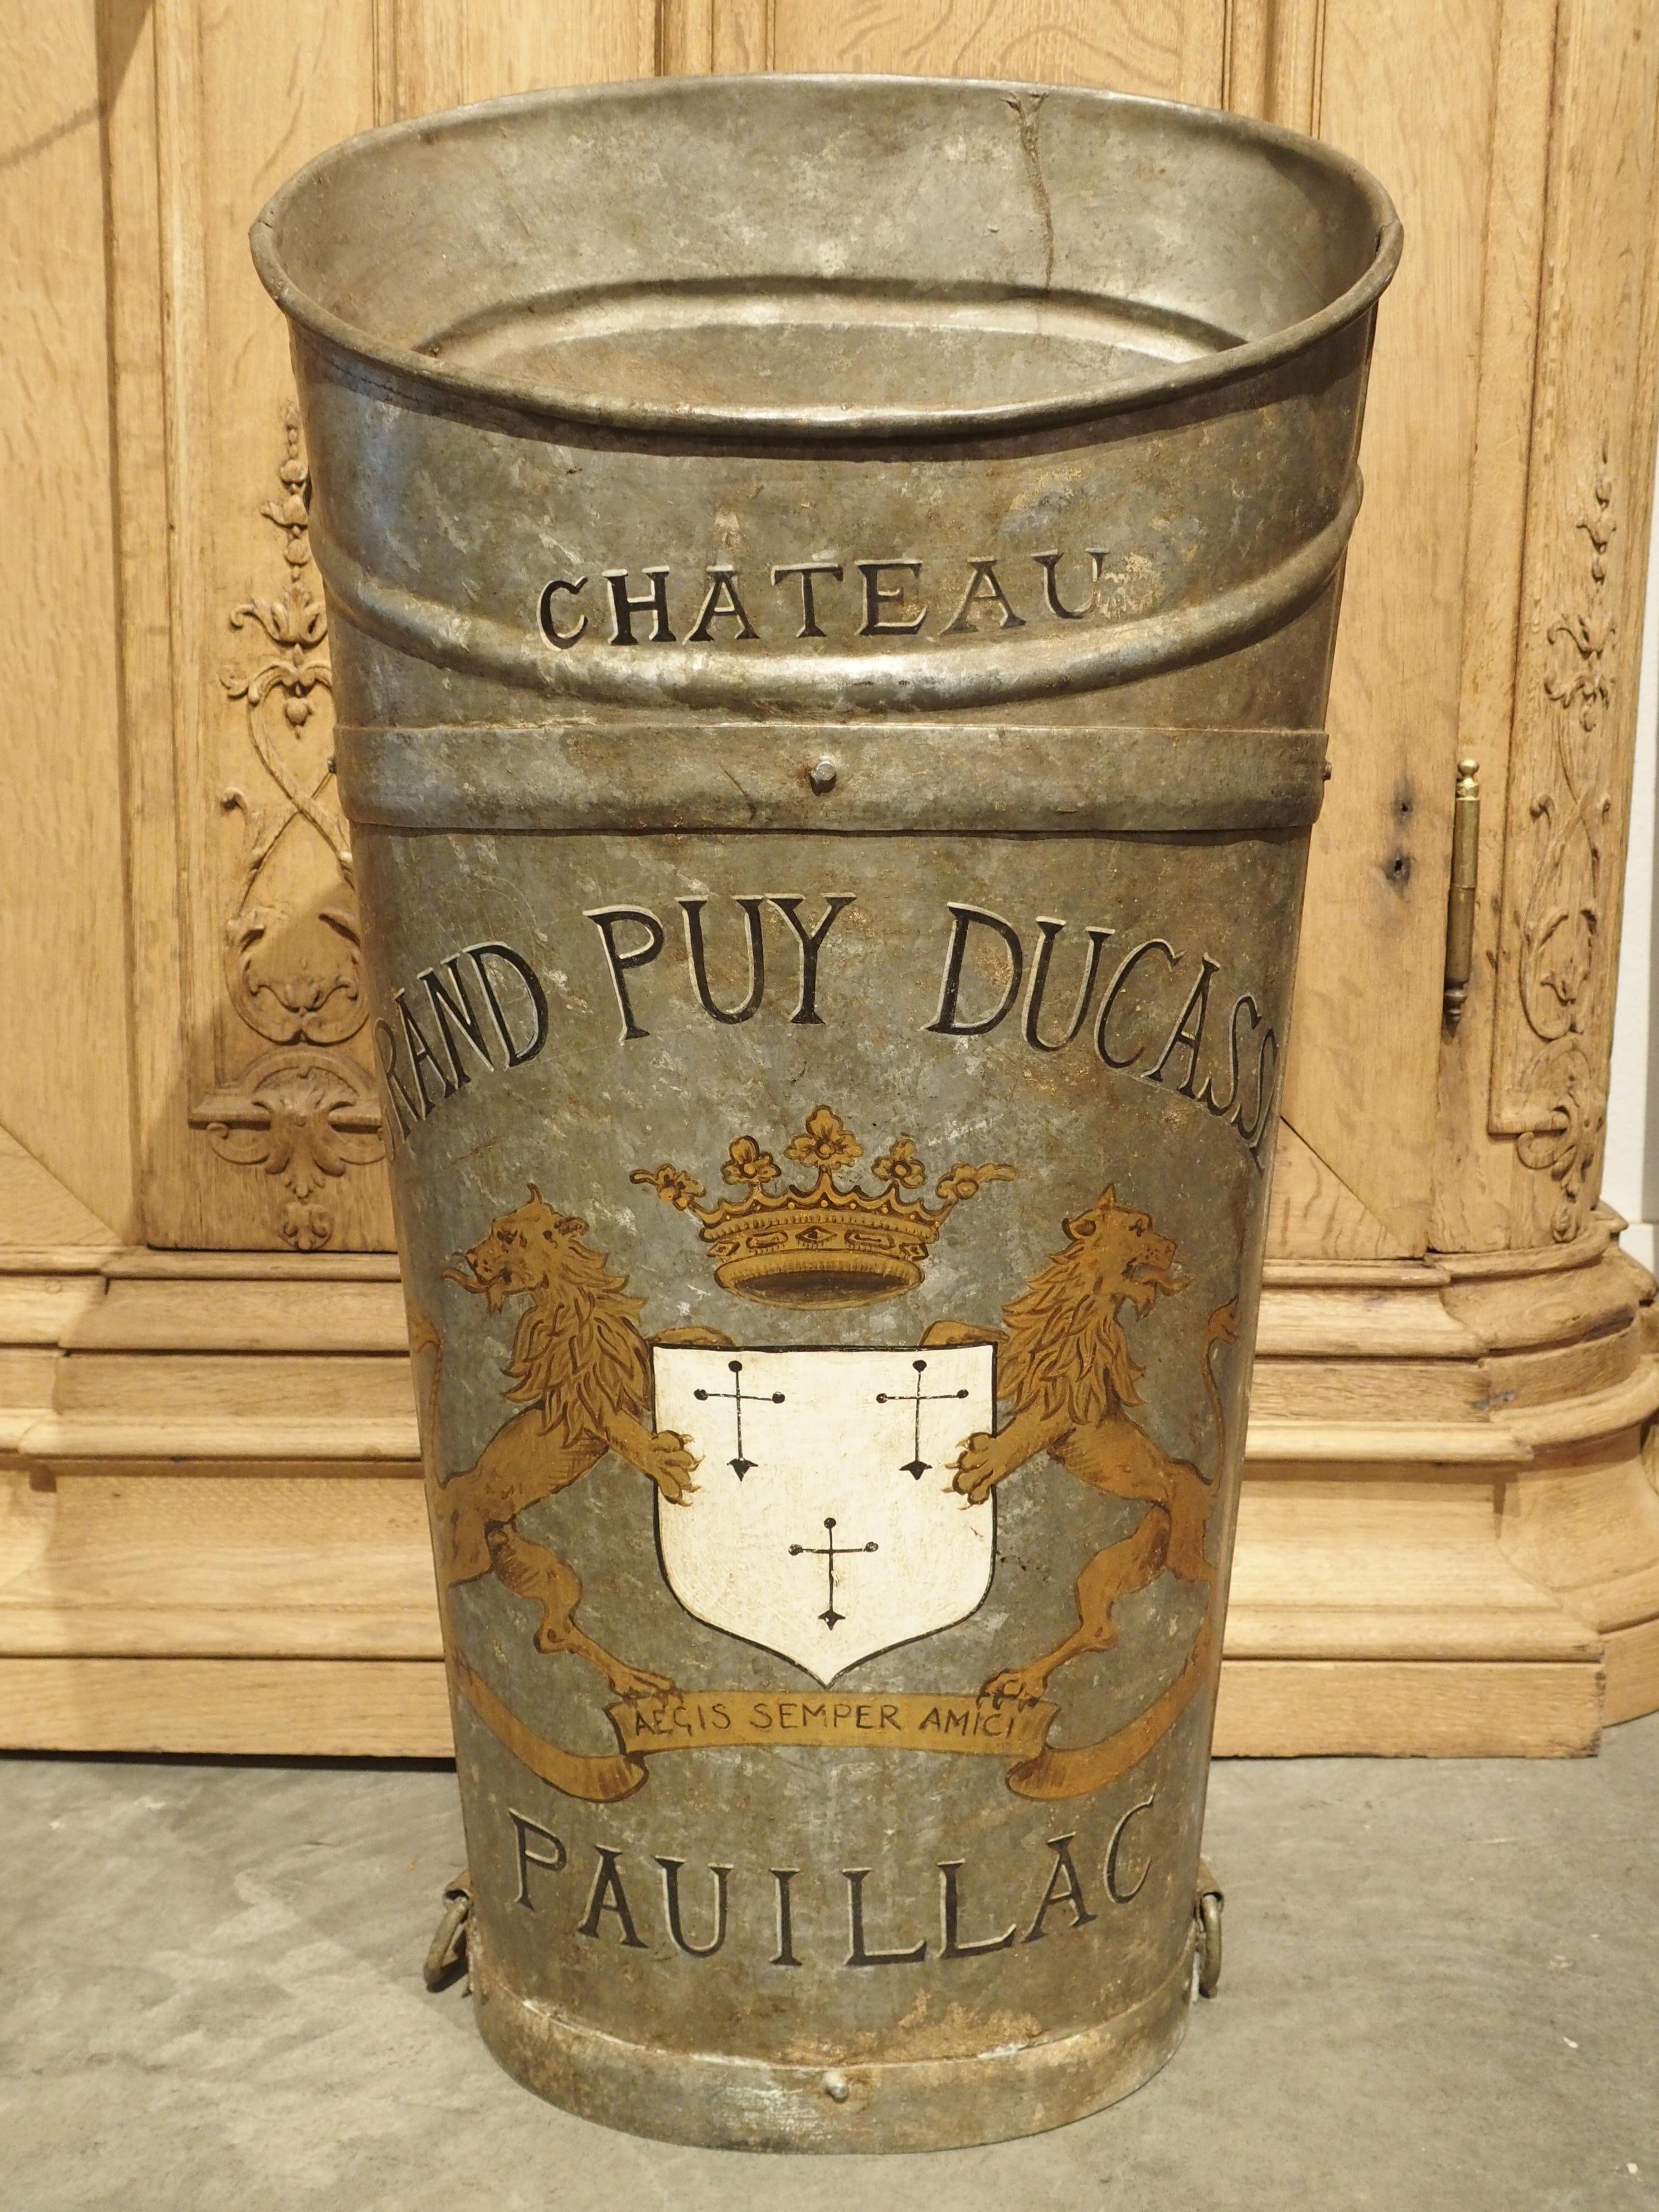 Painted French Grape Hotte, “Chateau Pauillac Grand Puy Ducasse” 3